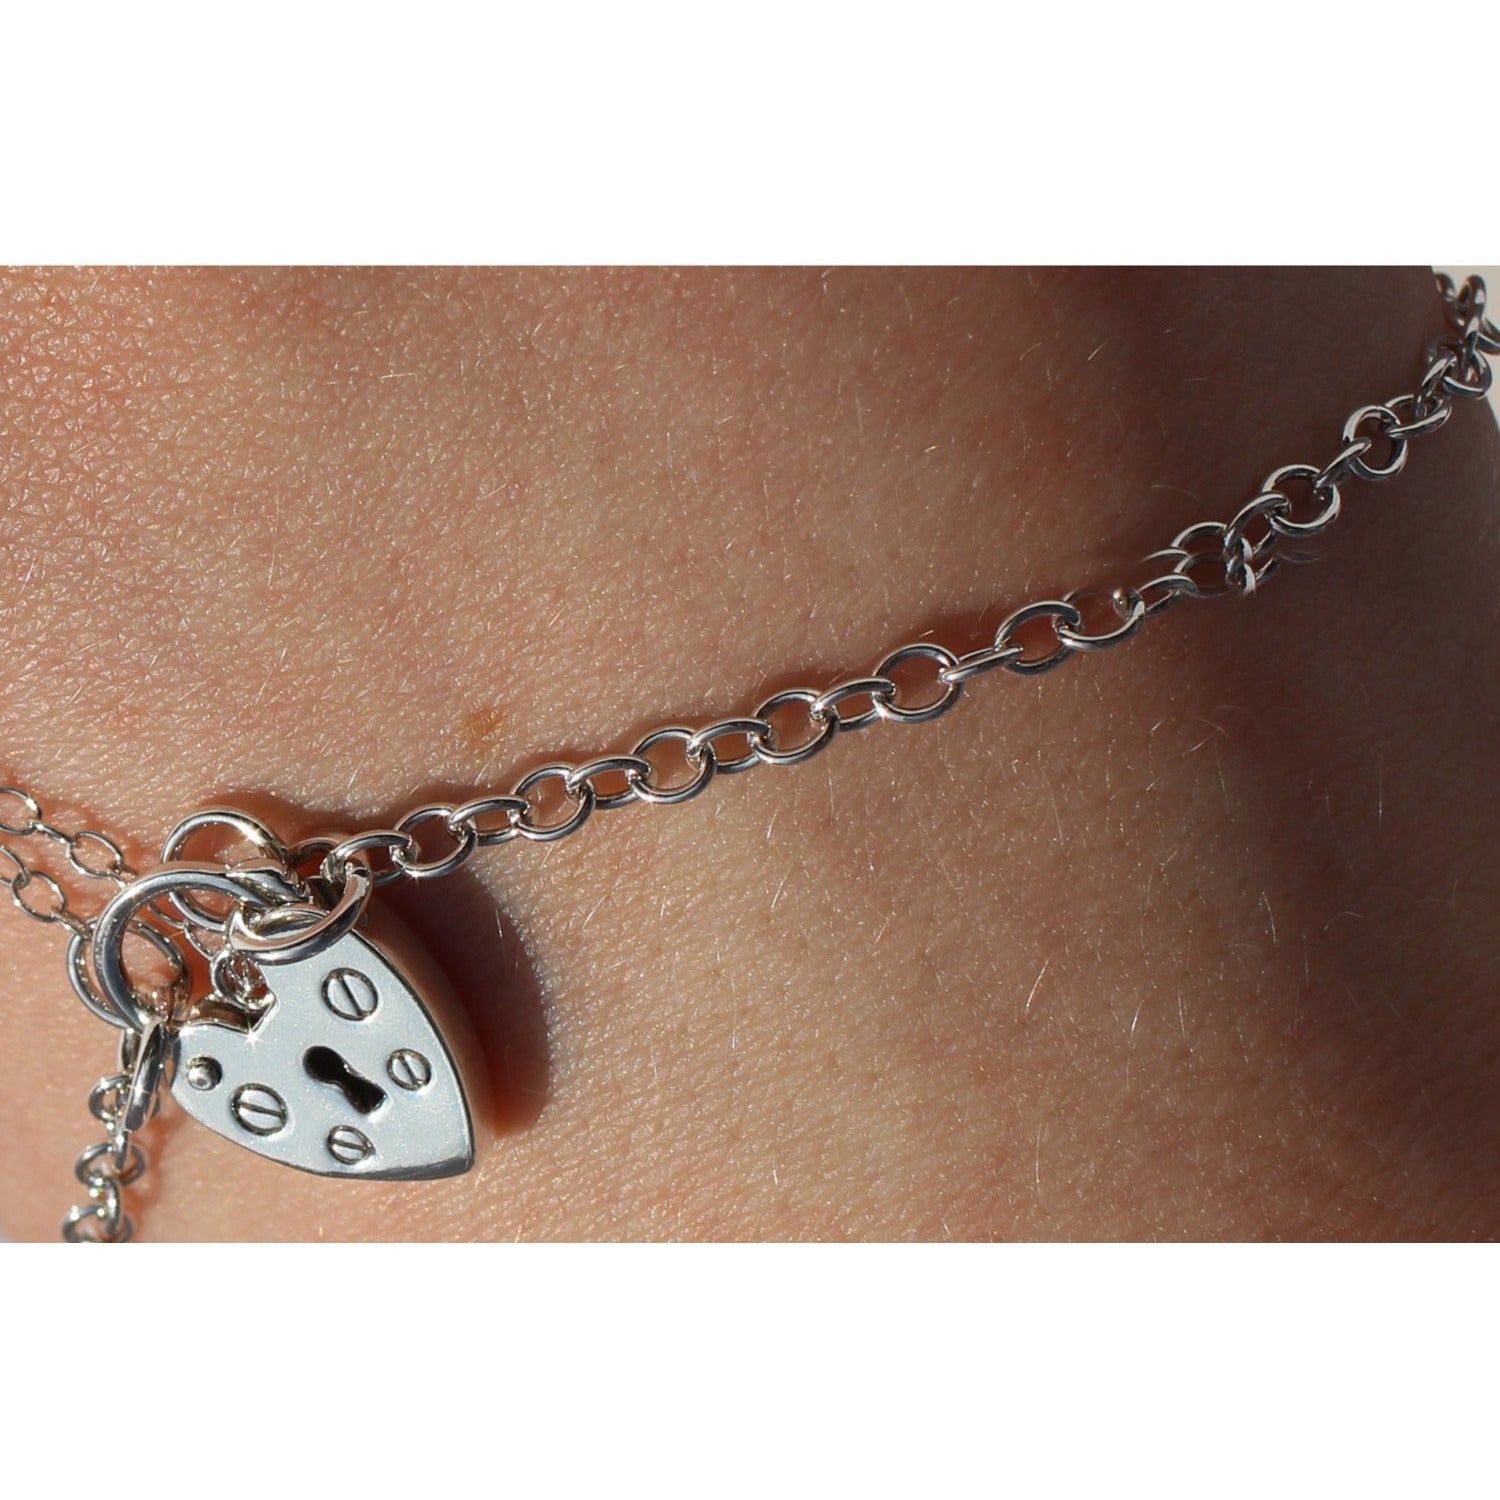 VINTAGE STYLE HEART PADLOCK CLASP, BRACELET AND CHAIN STERLING SILVER.